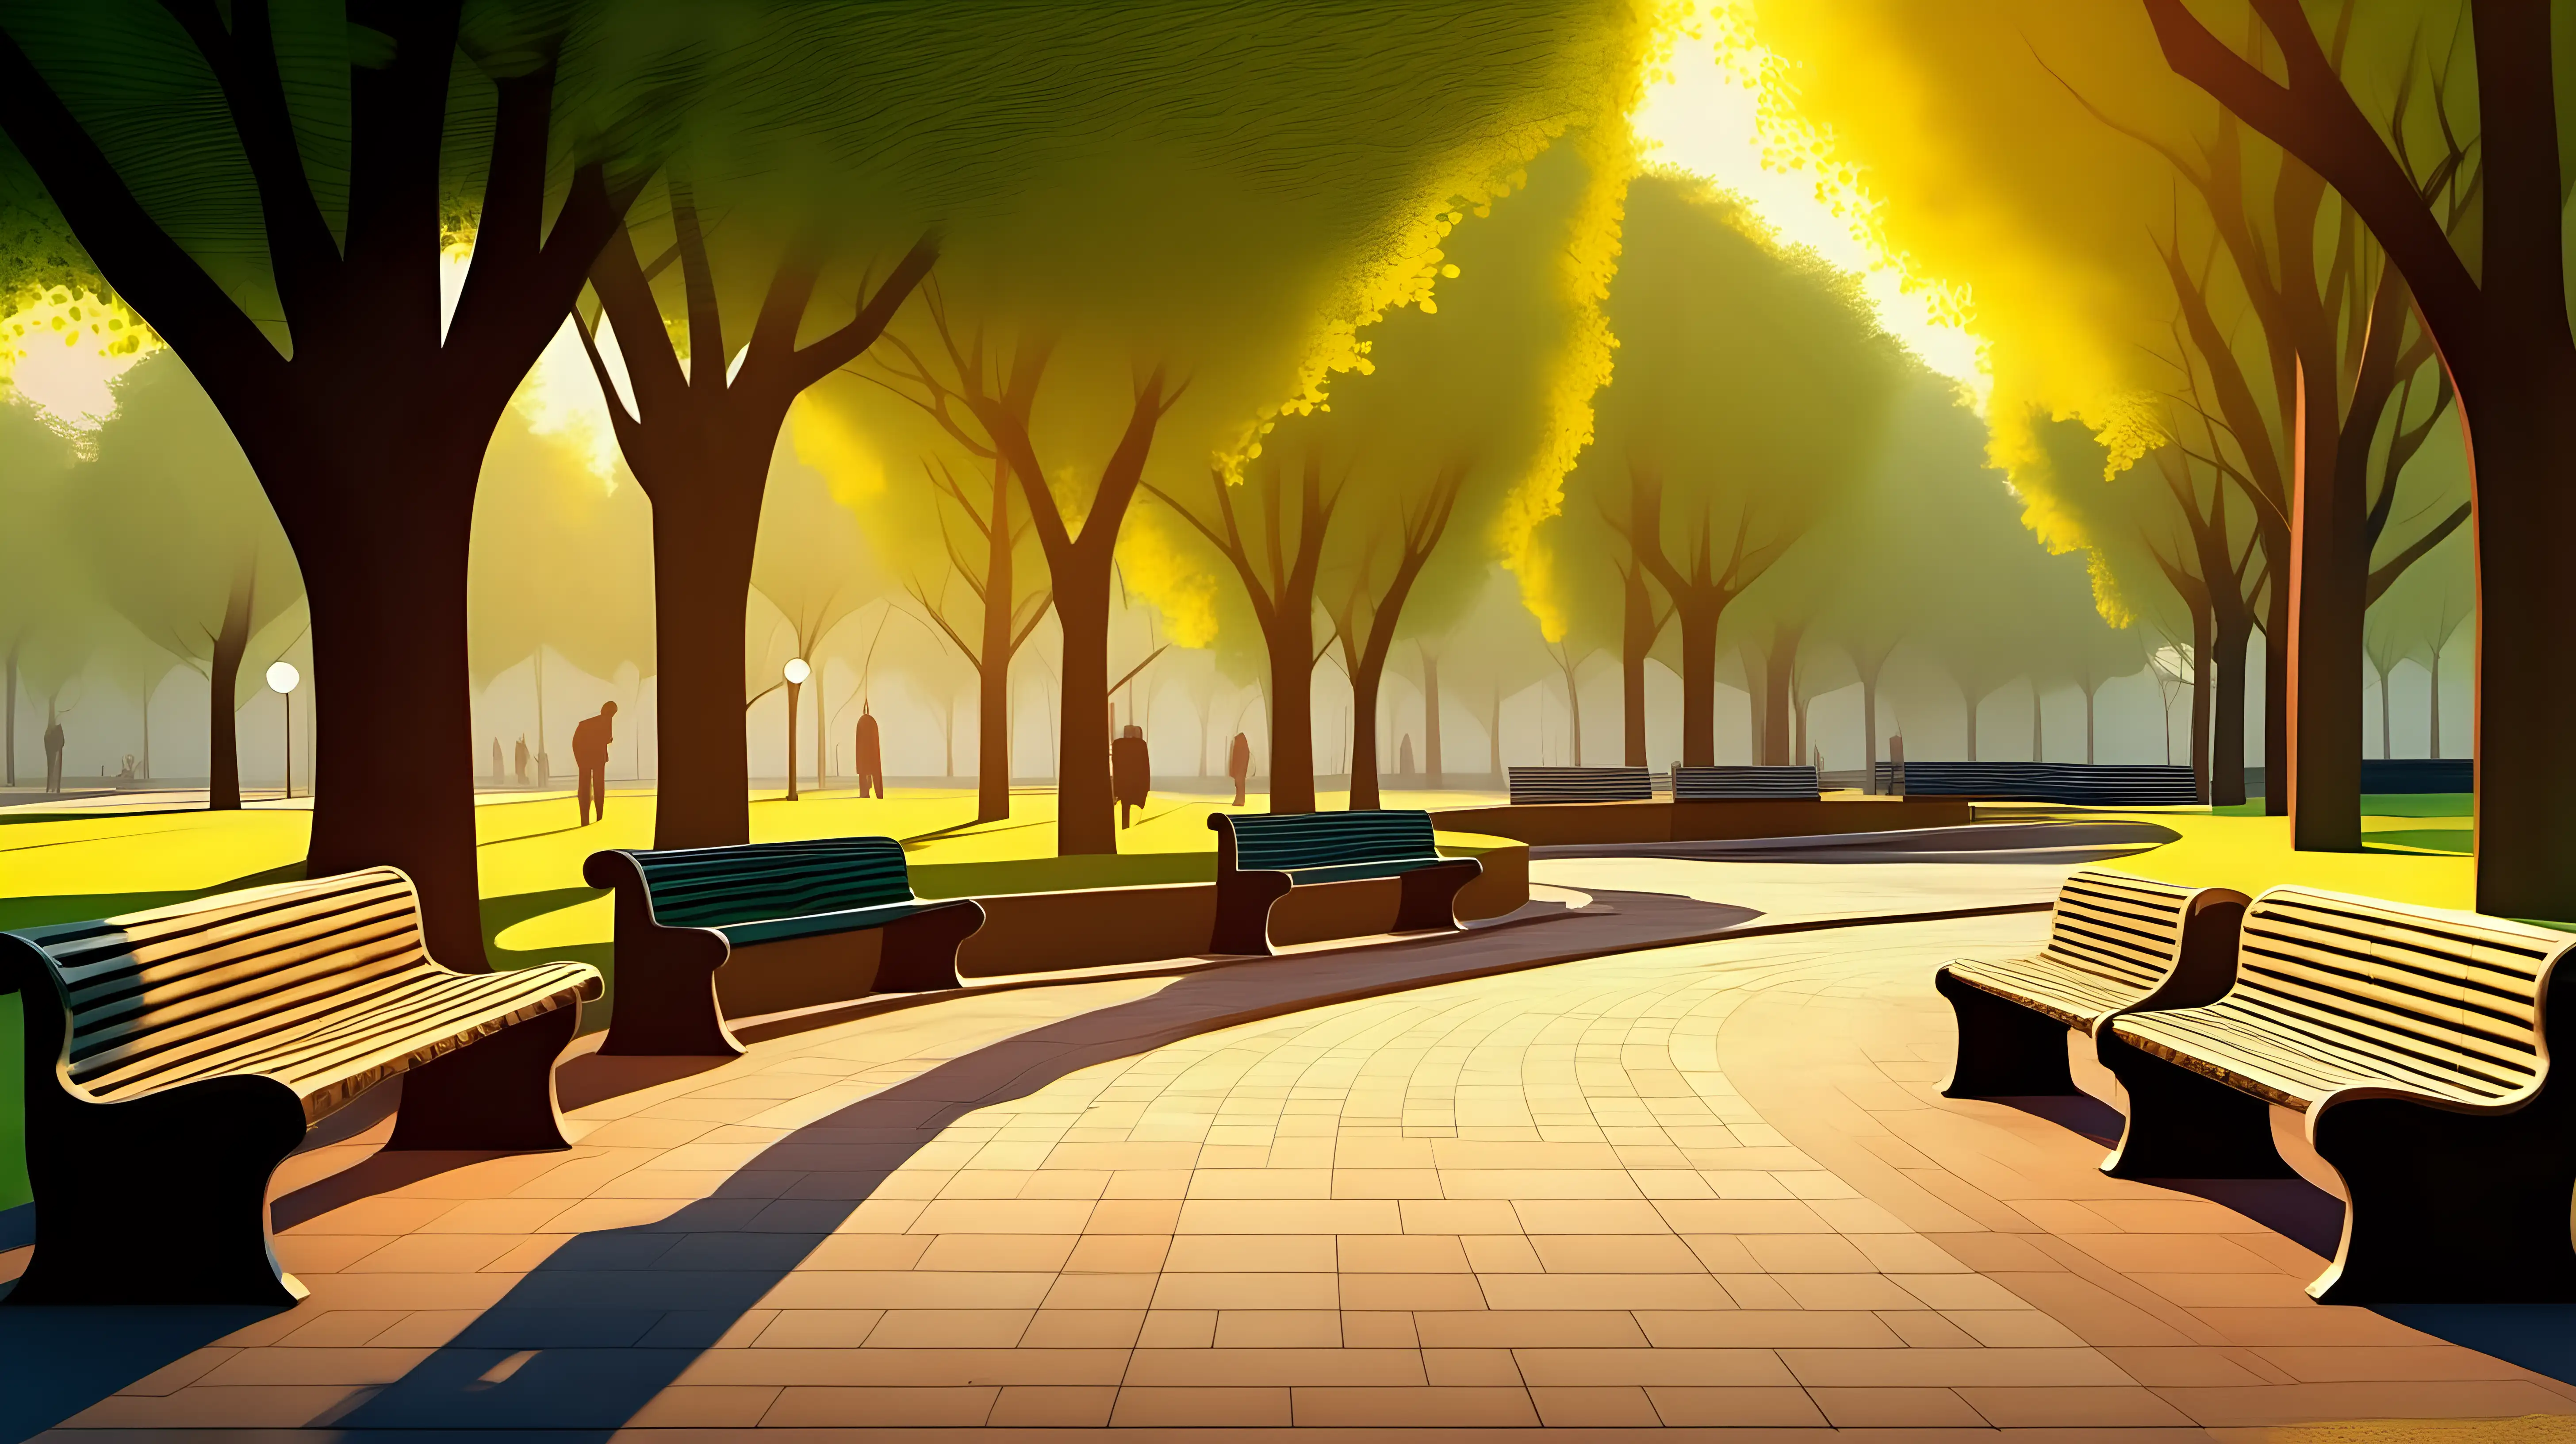 Tranquil Sunset Stroll in Serene Park with Benches